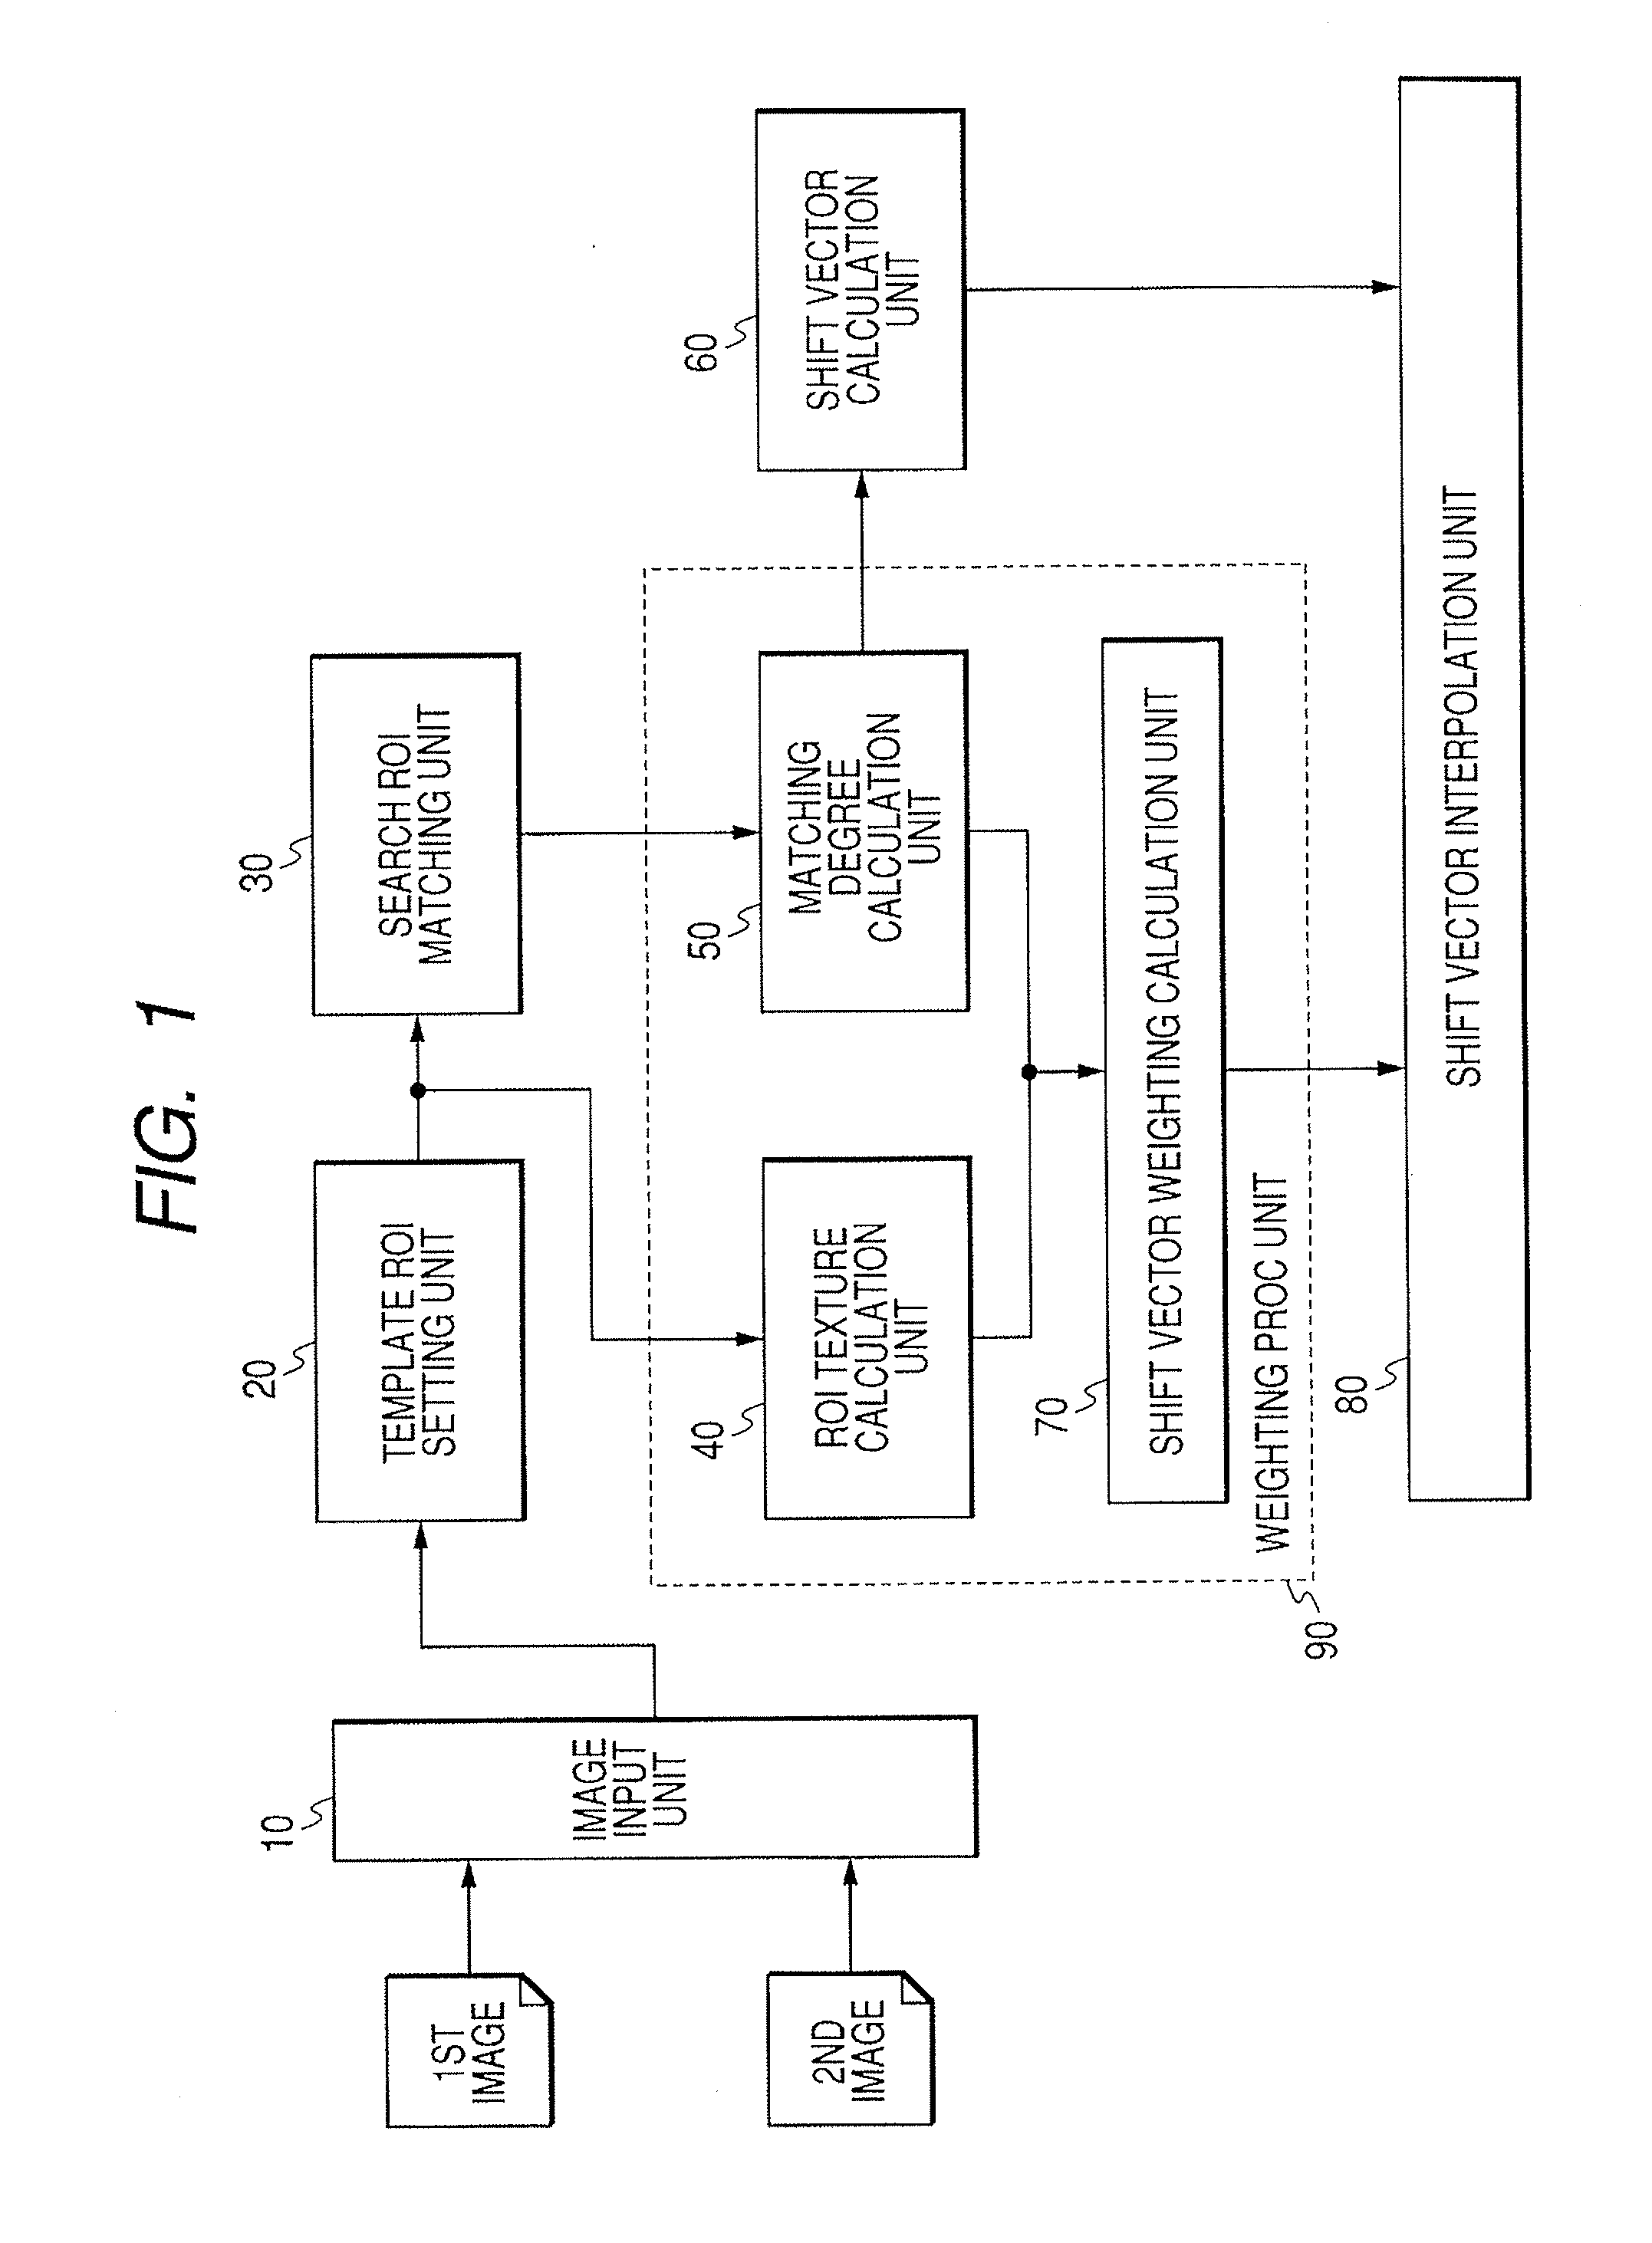 Image Processing Device And Method Which Use Two Images